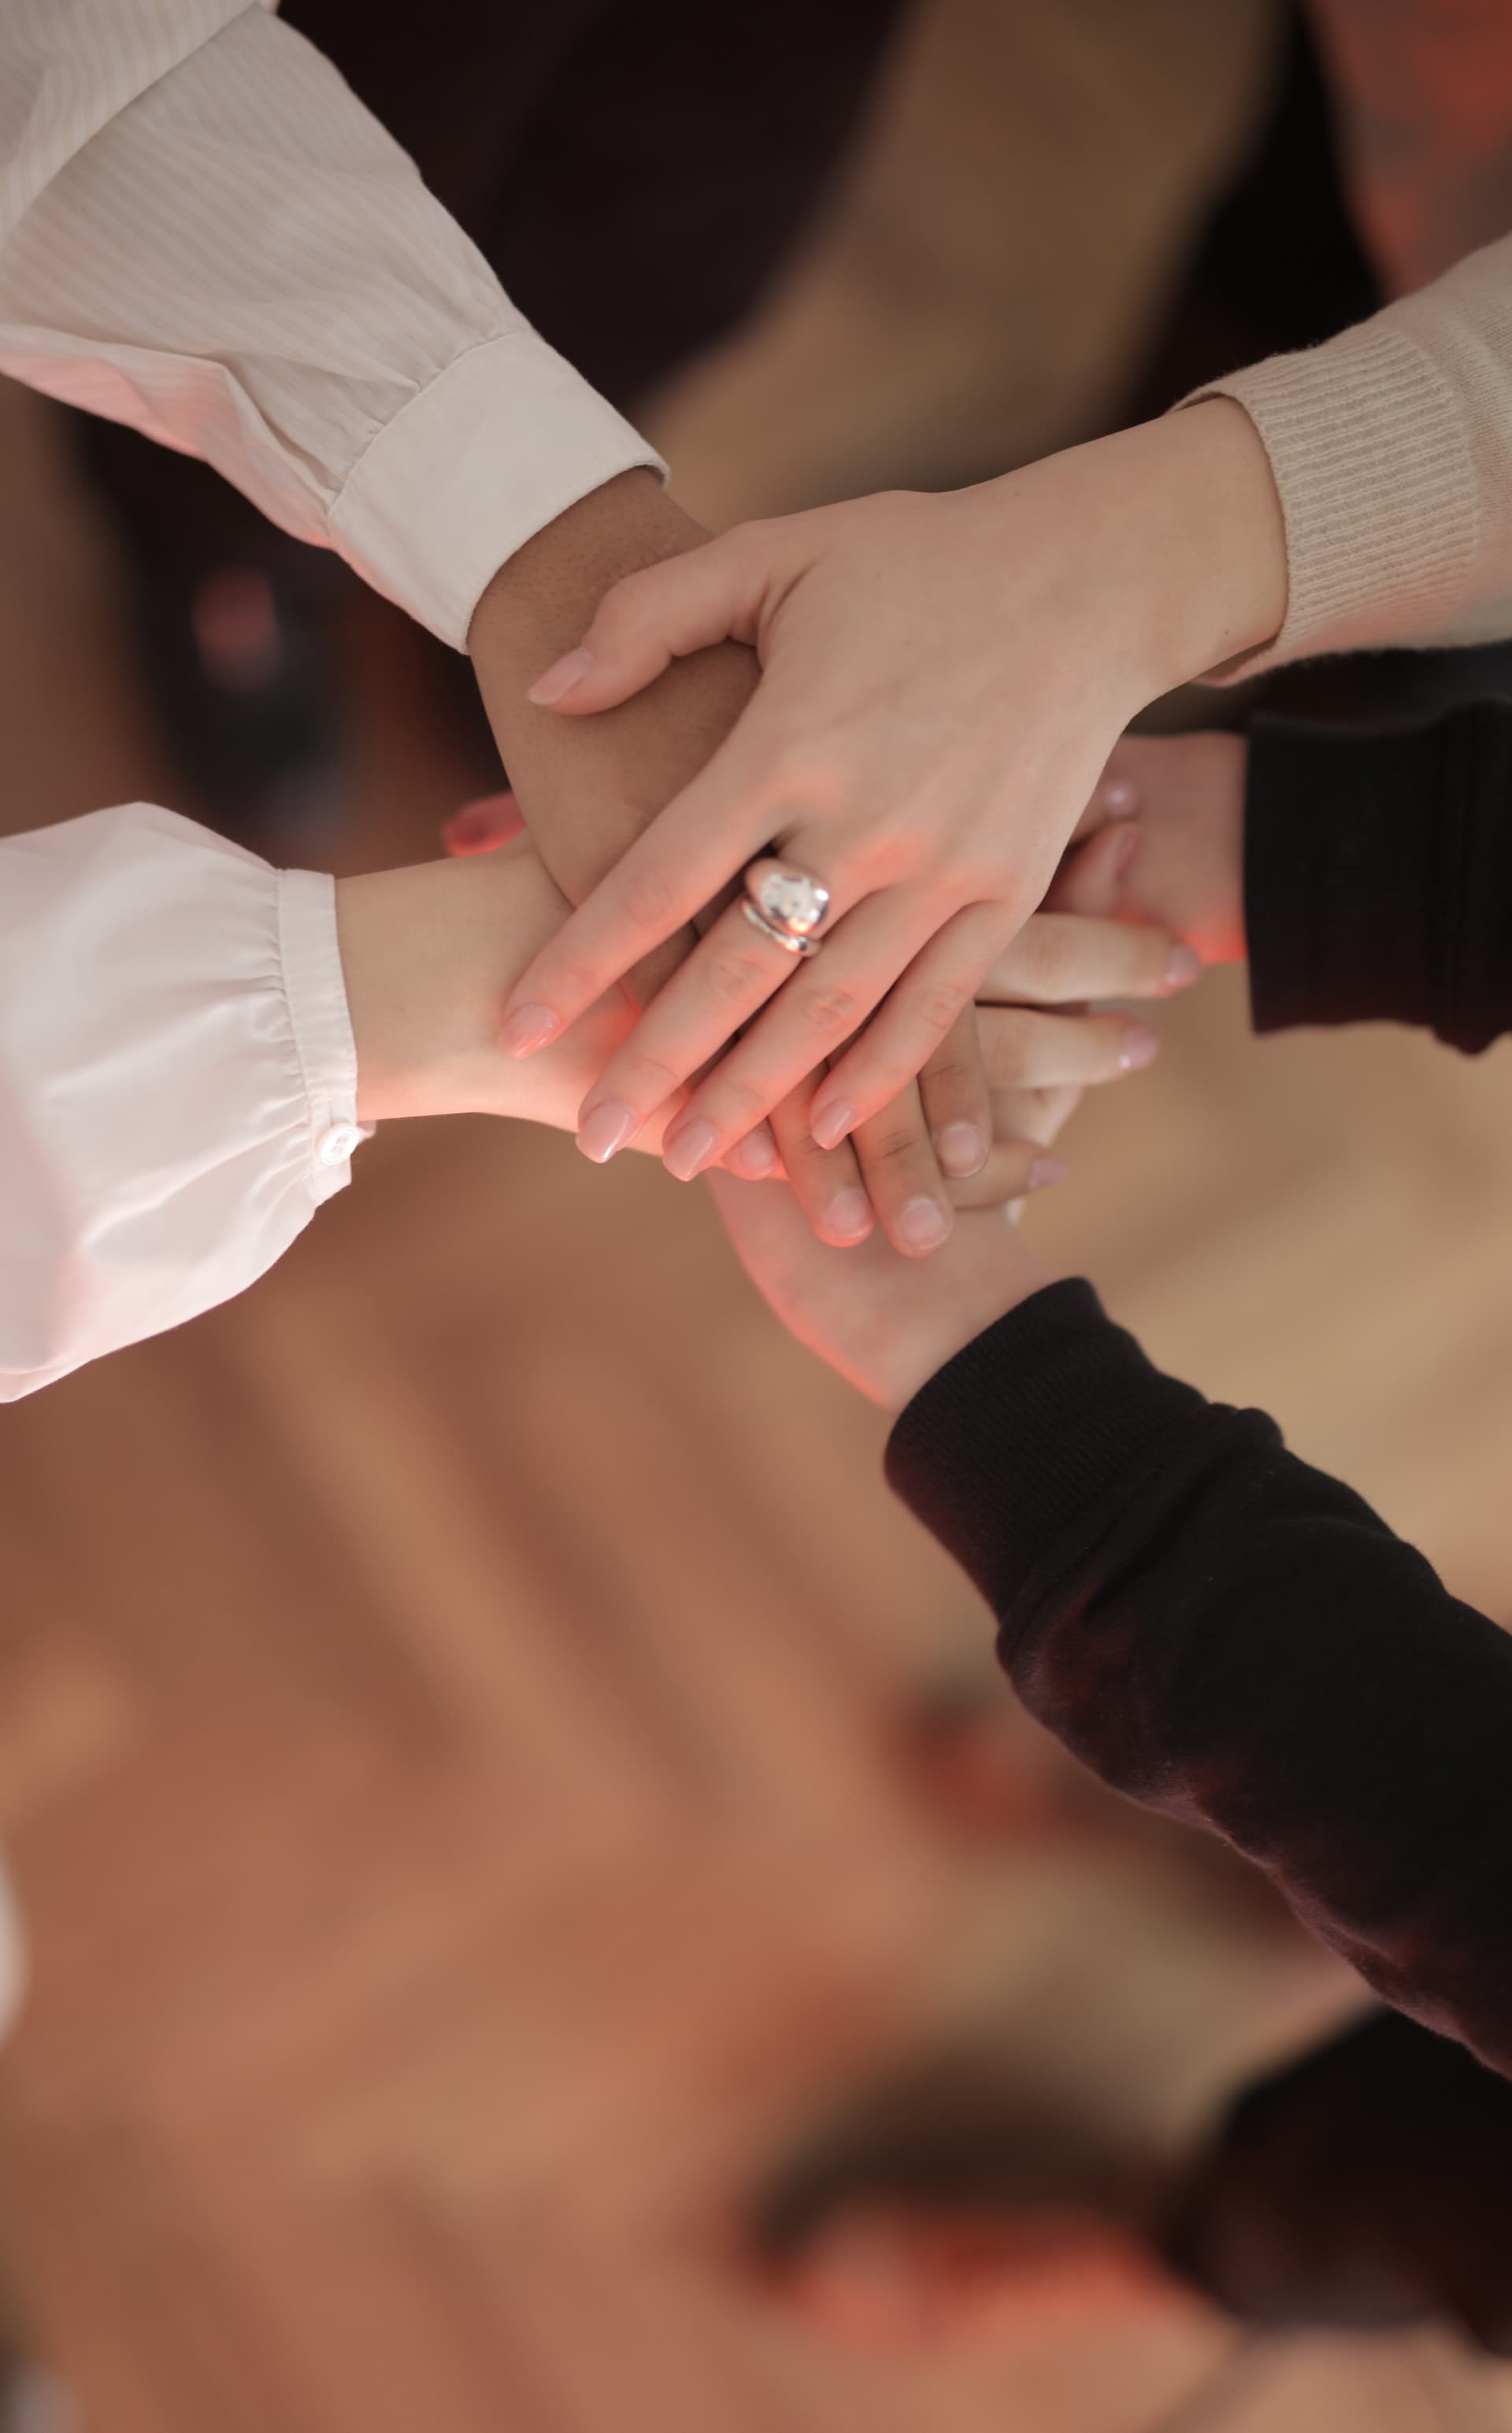 Photo of joined hands showing unity